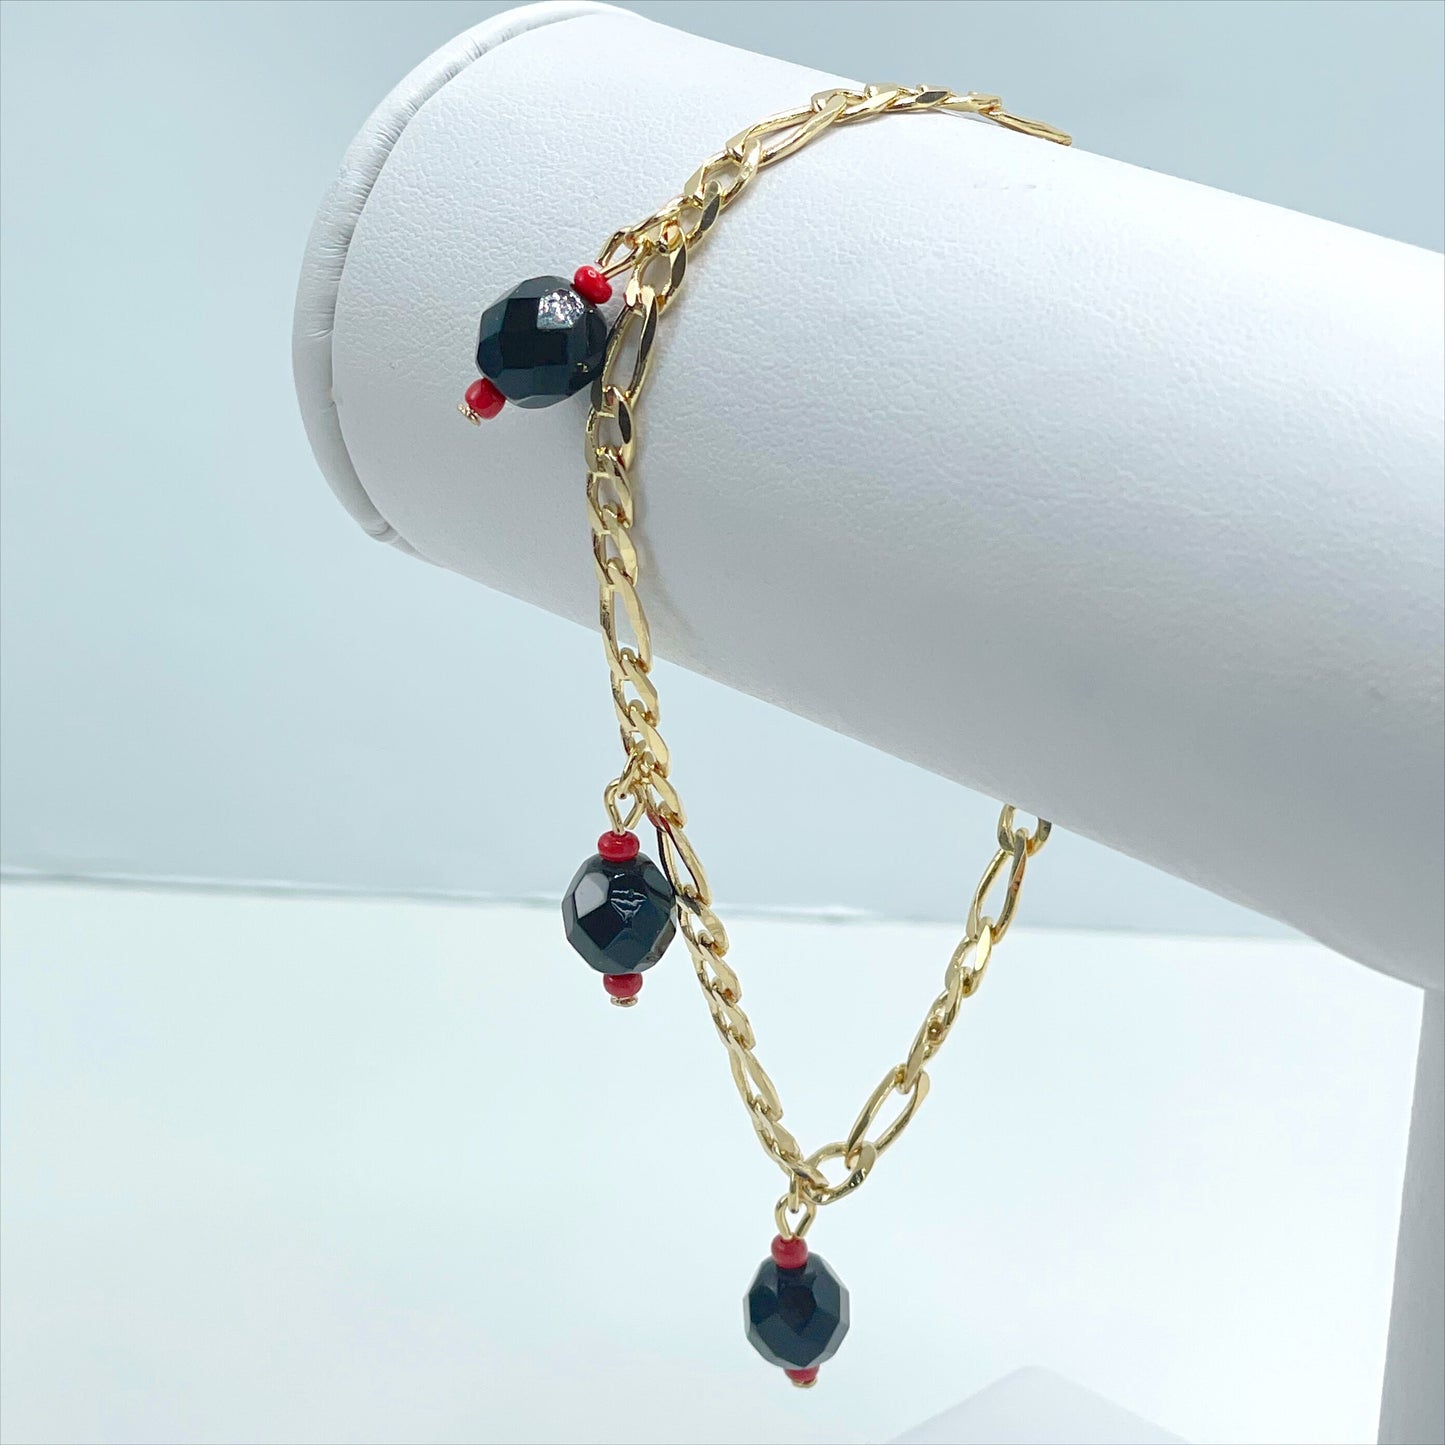 18k Gold Filled Figaro Link 5mm, Black and Red Beads, Tornasol, Litmus  Bracelet, Lucky & Protection, Wholesale Jewelry Making Supplies